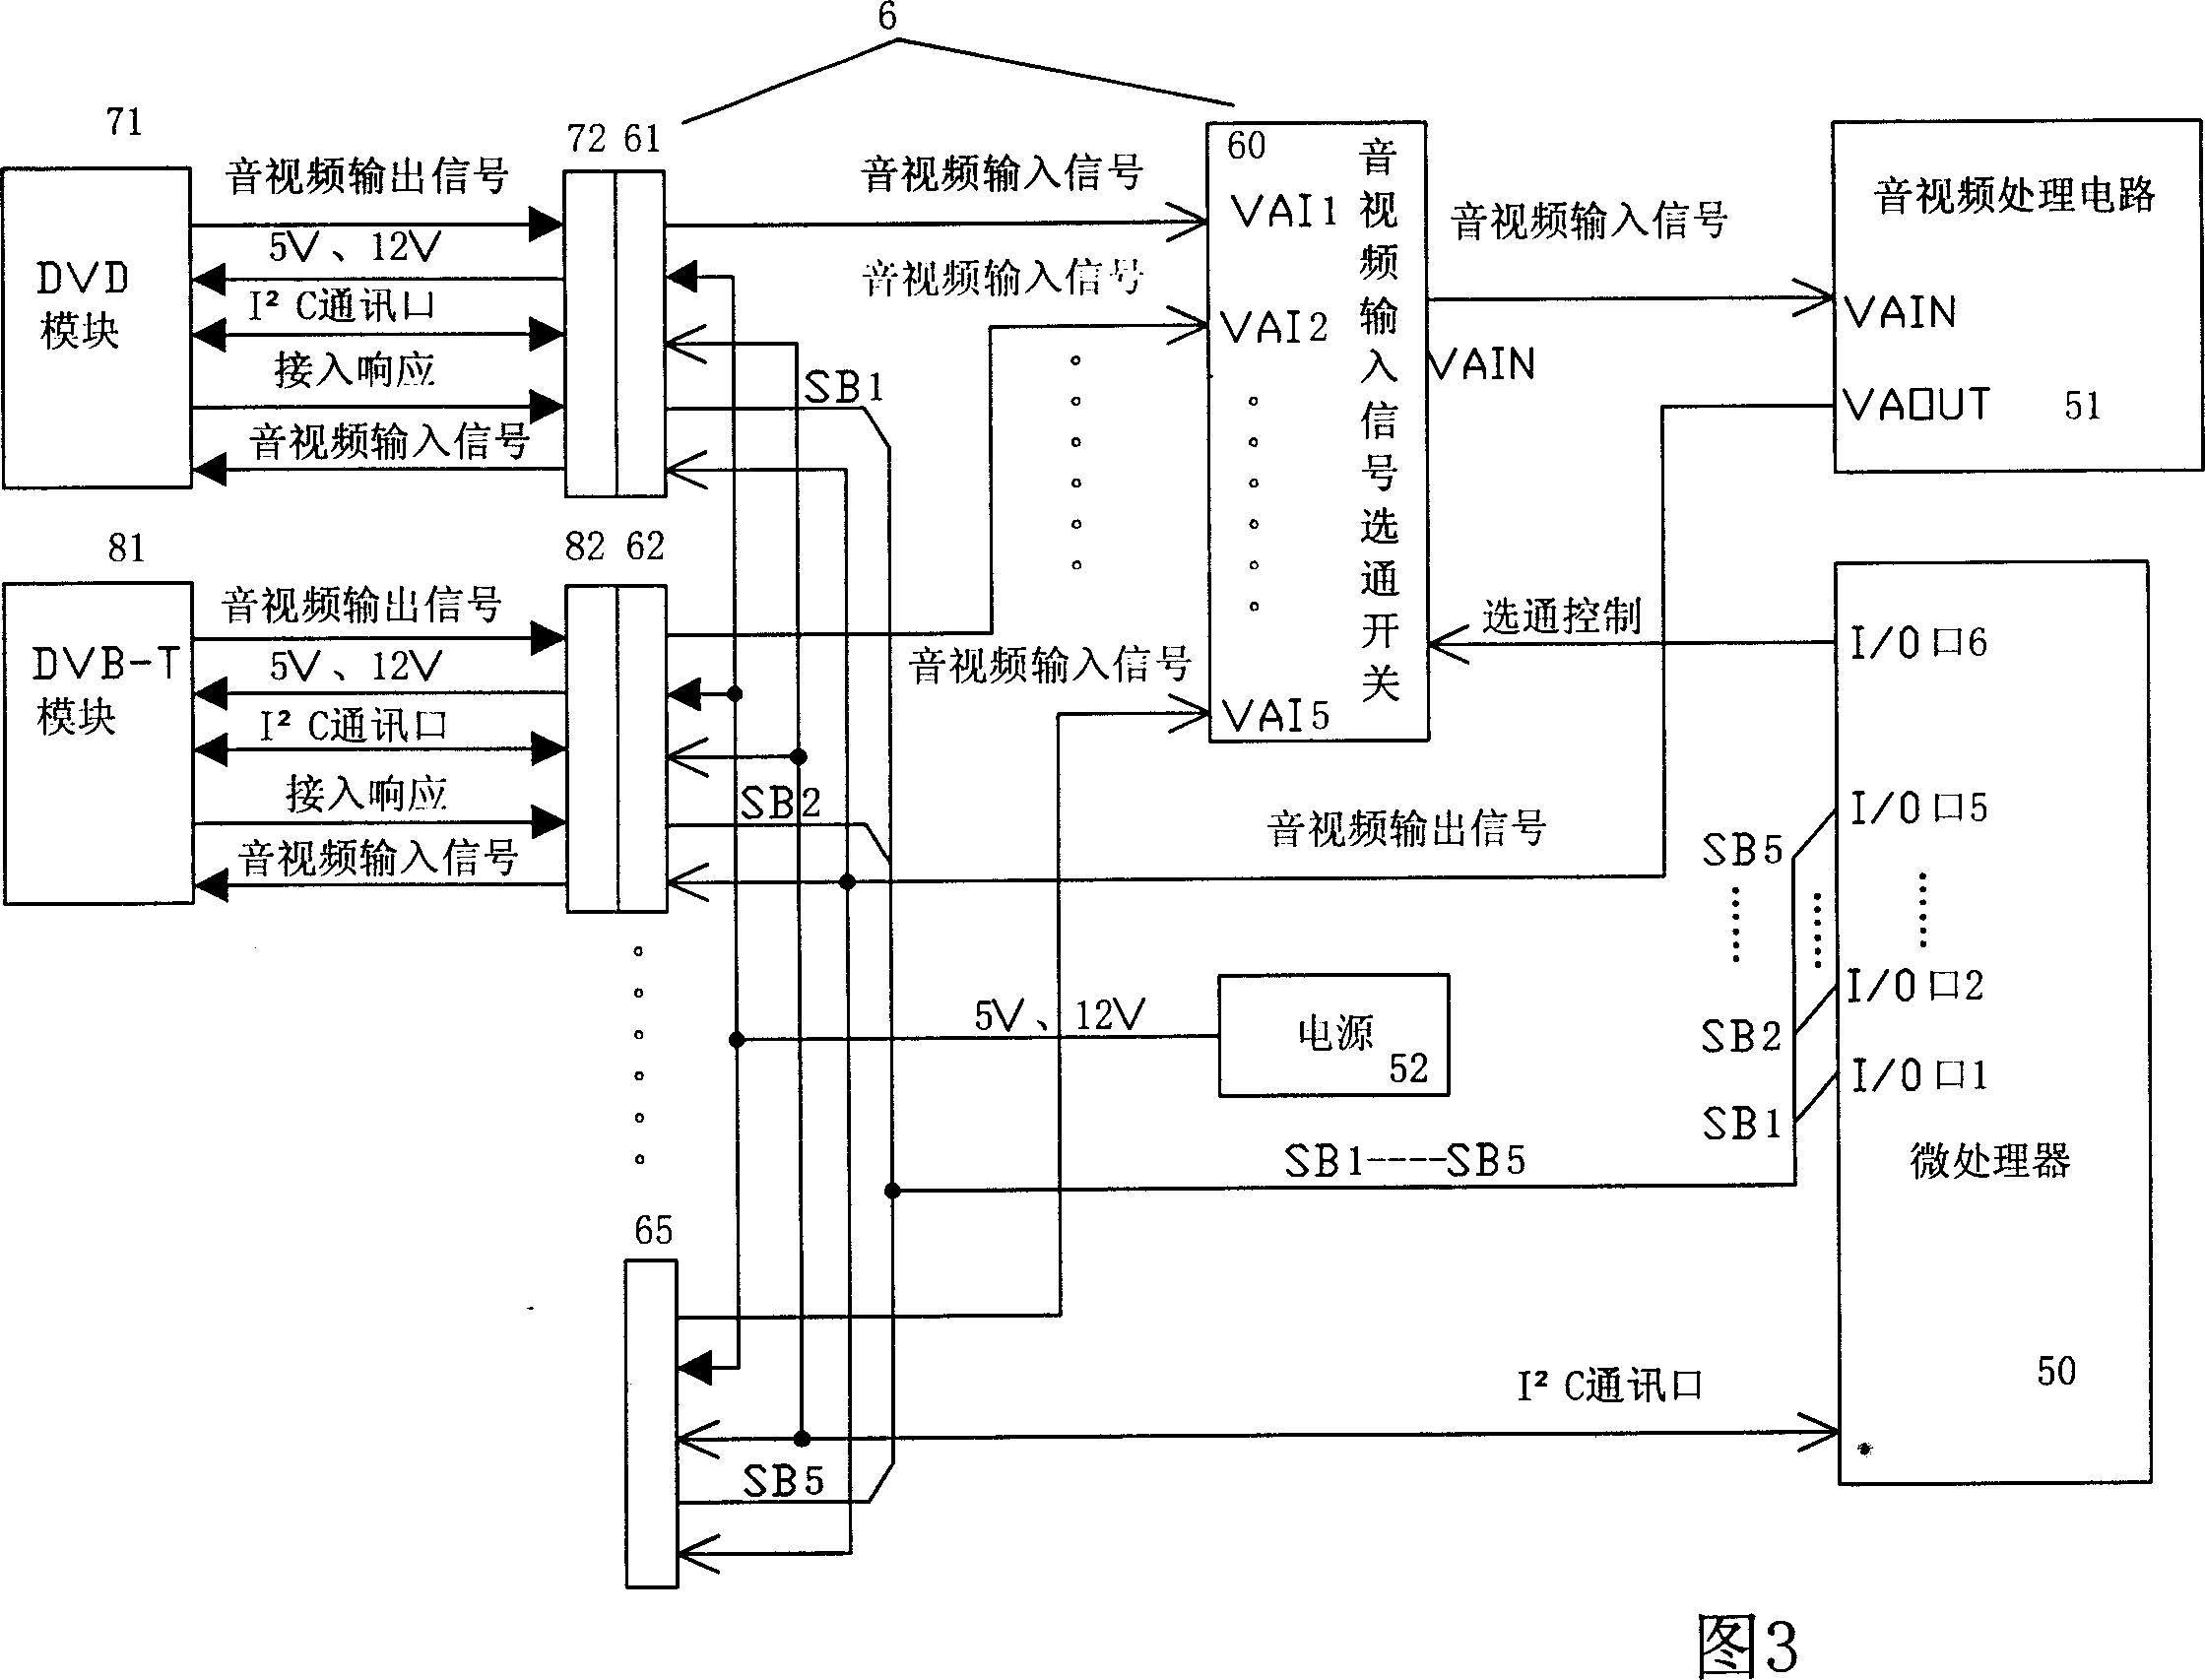 A method for TV set identifying automatically extended function module